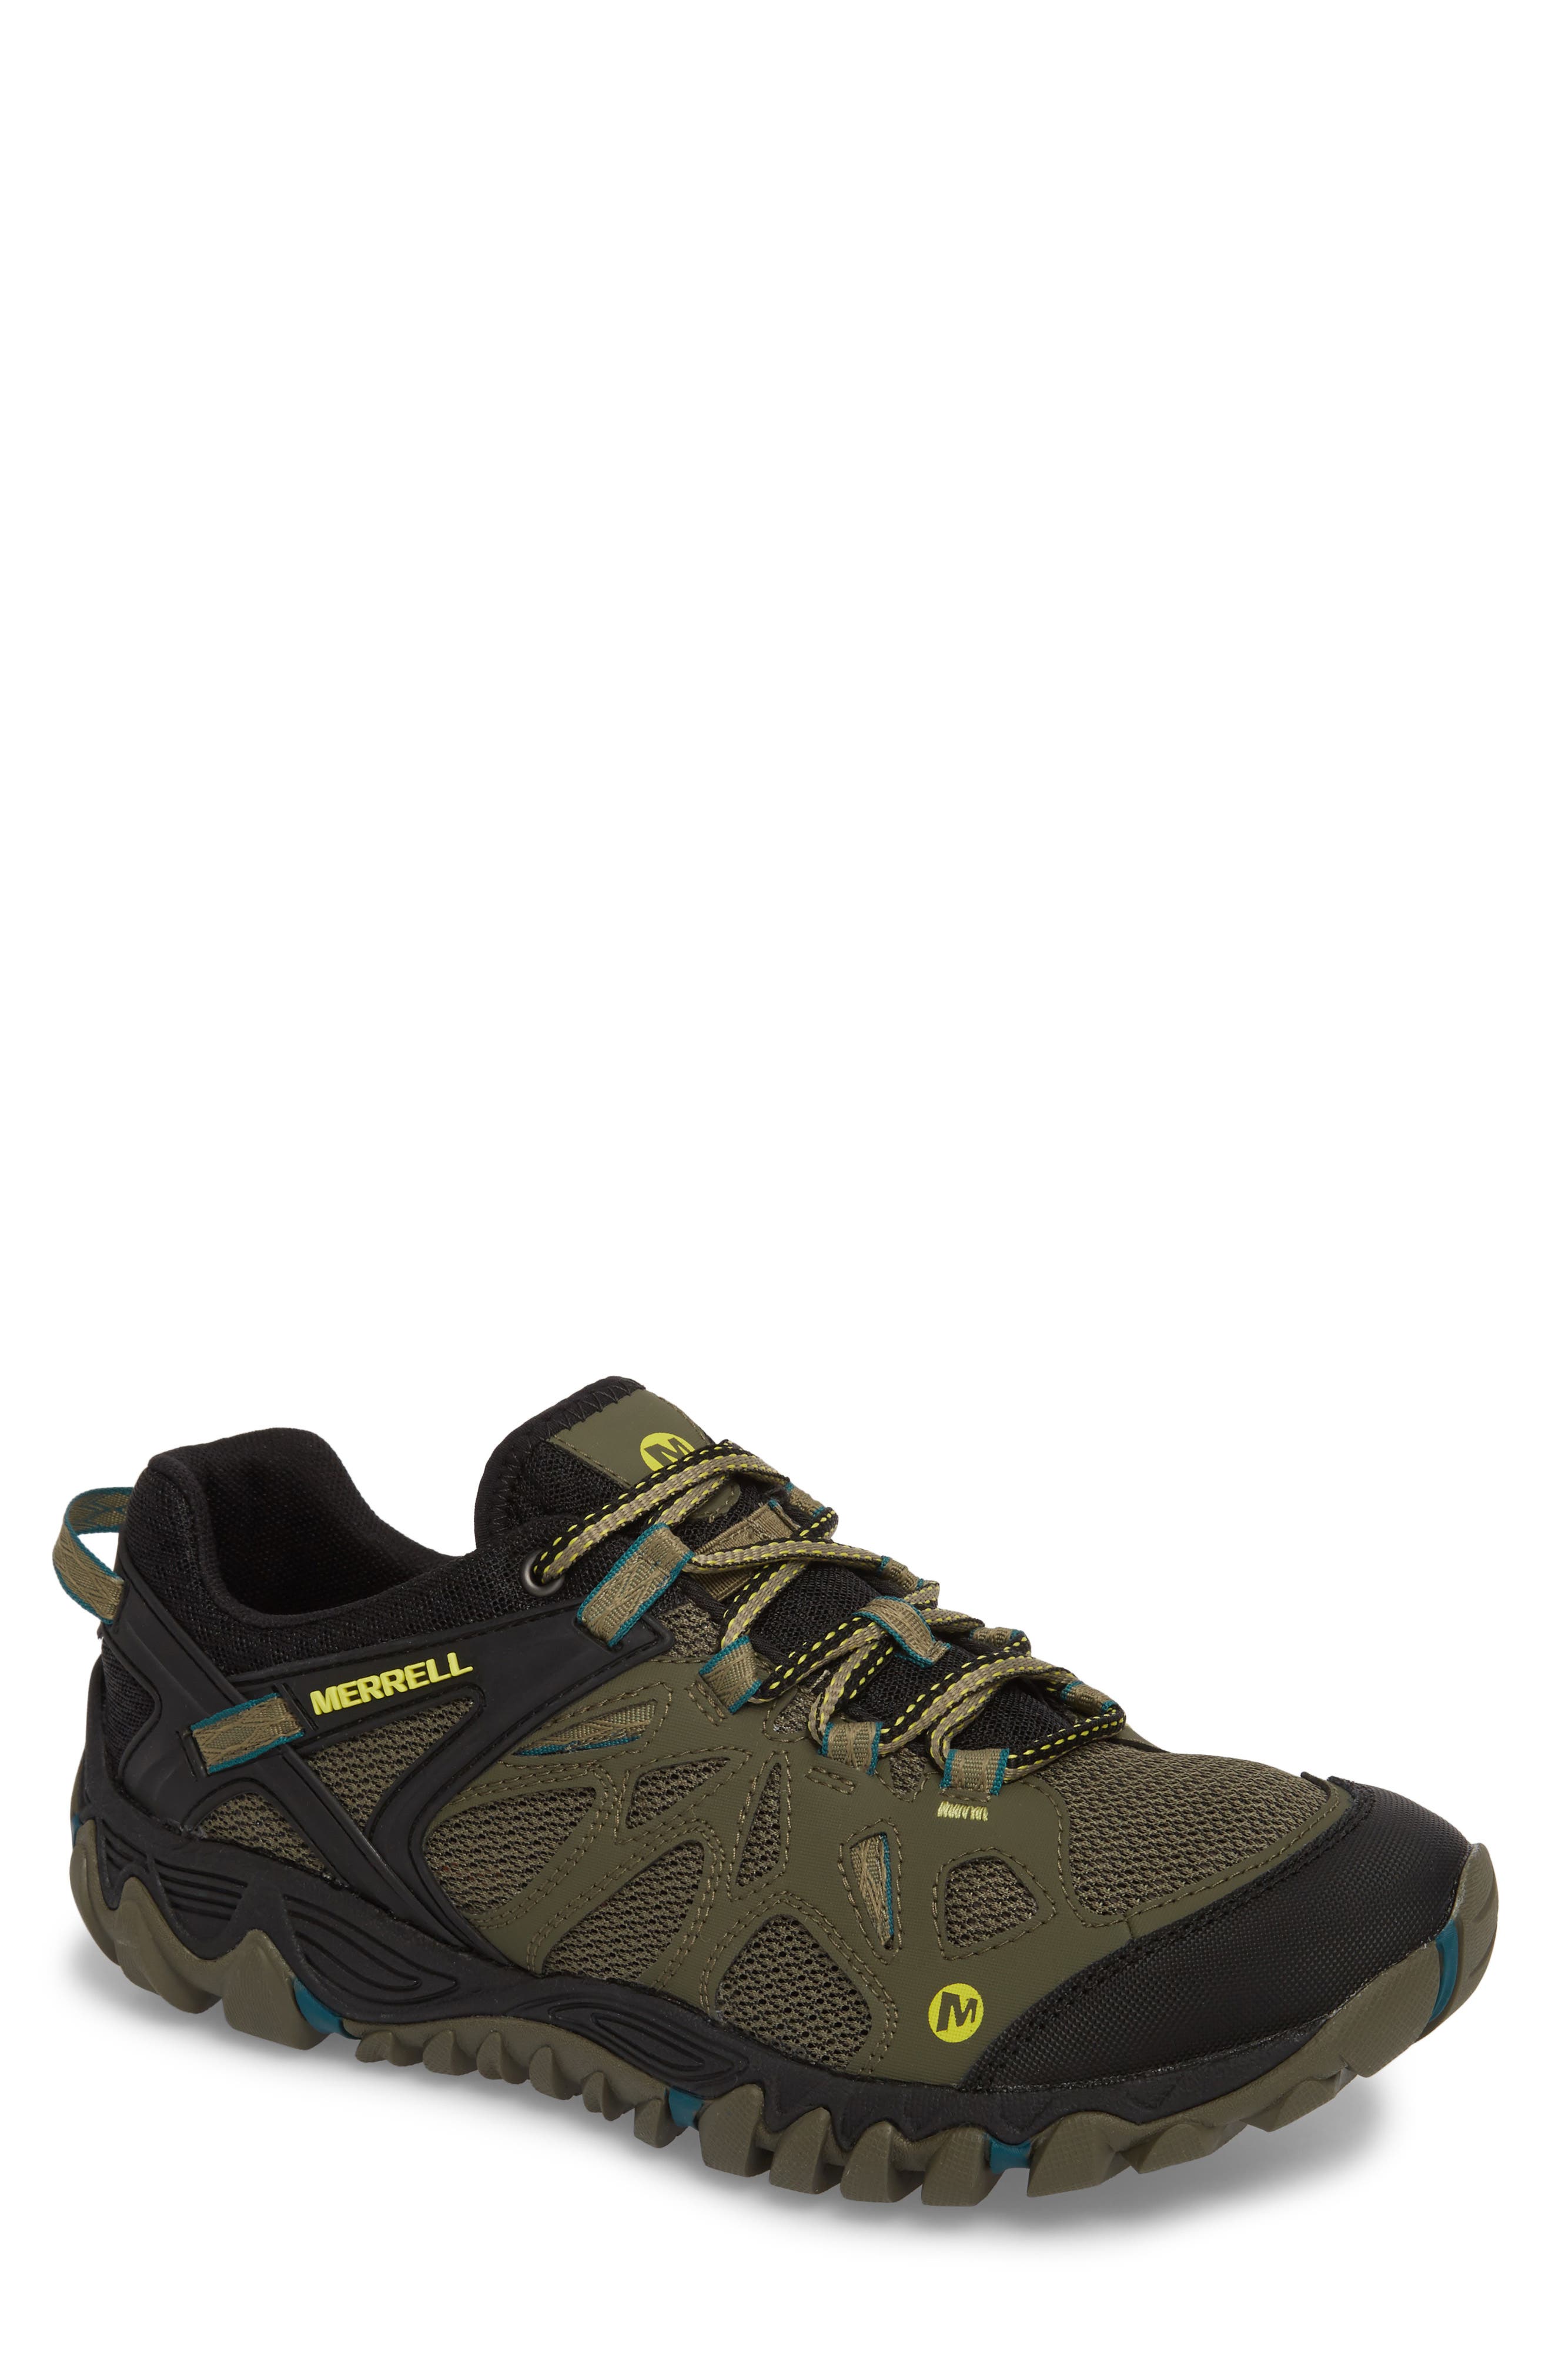 merrell all out blaze hiking shoe